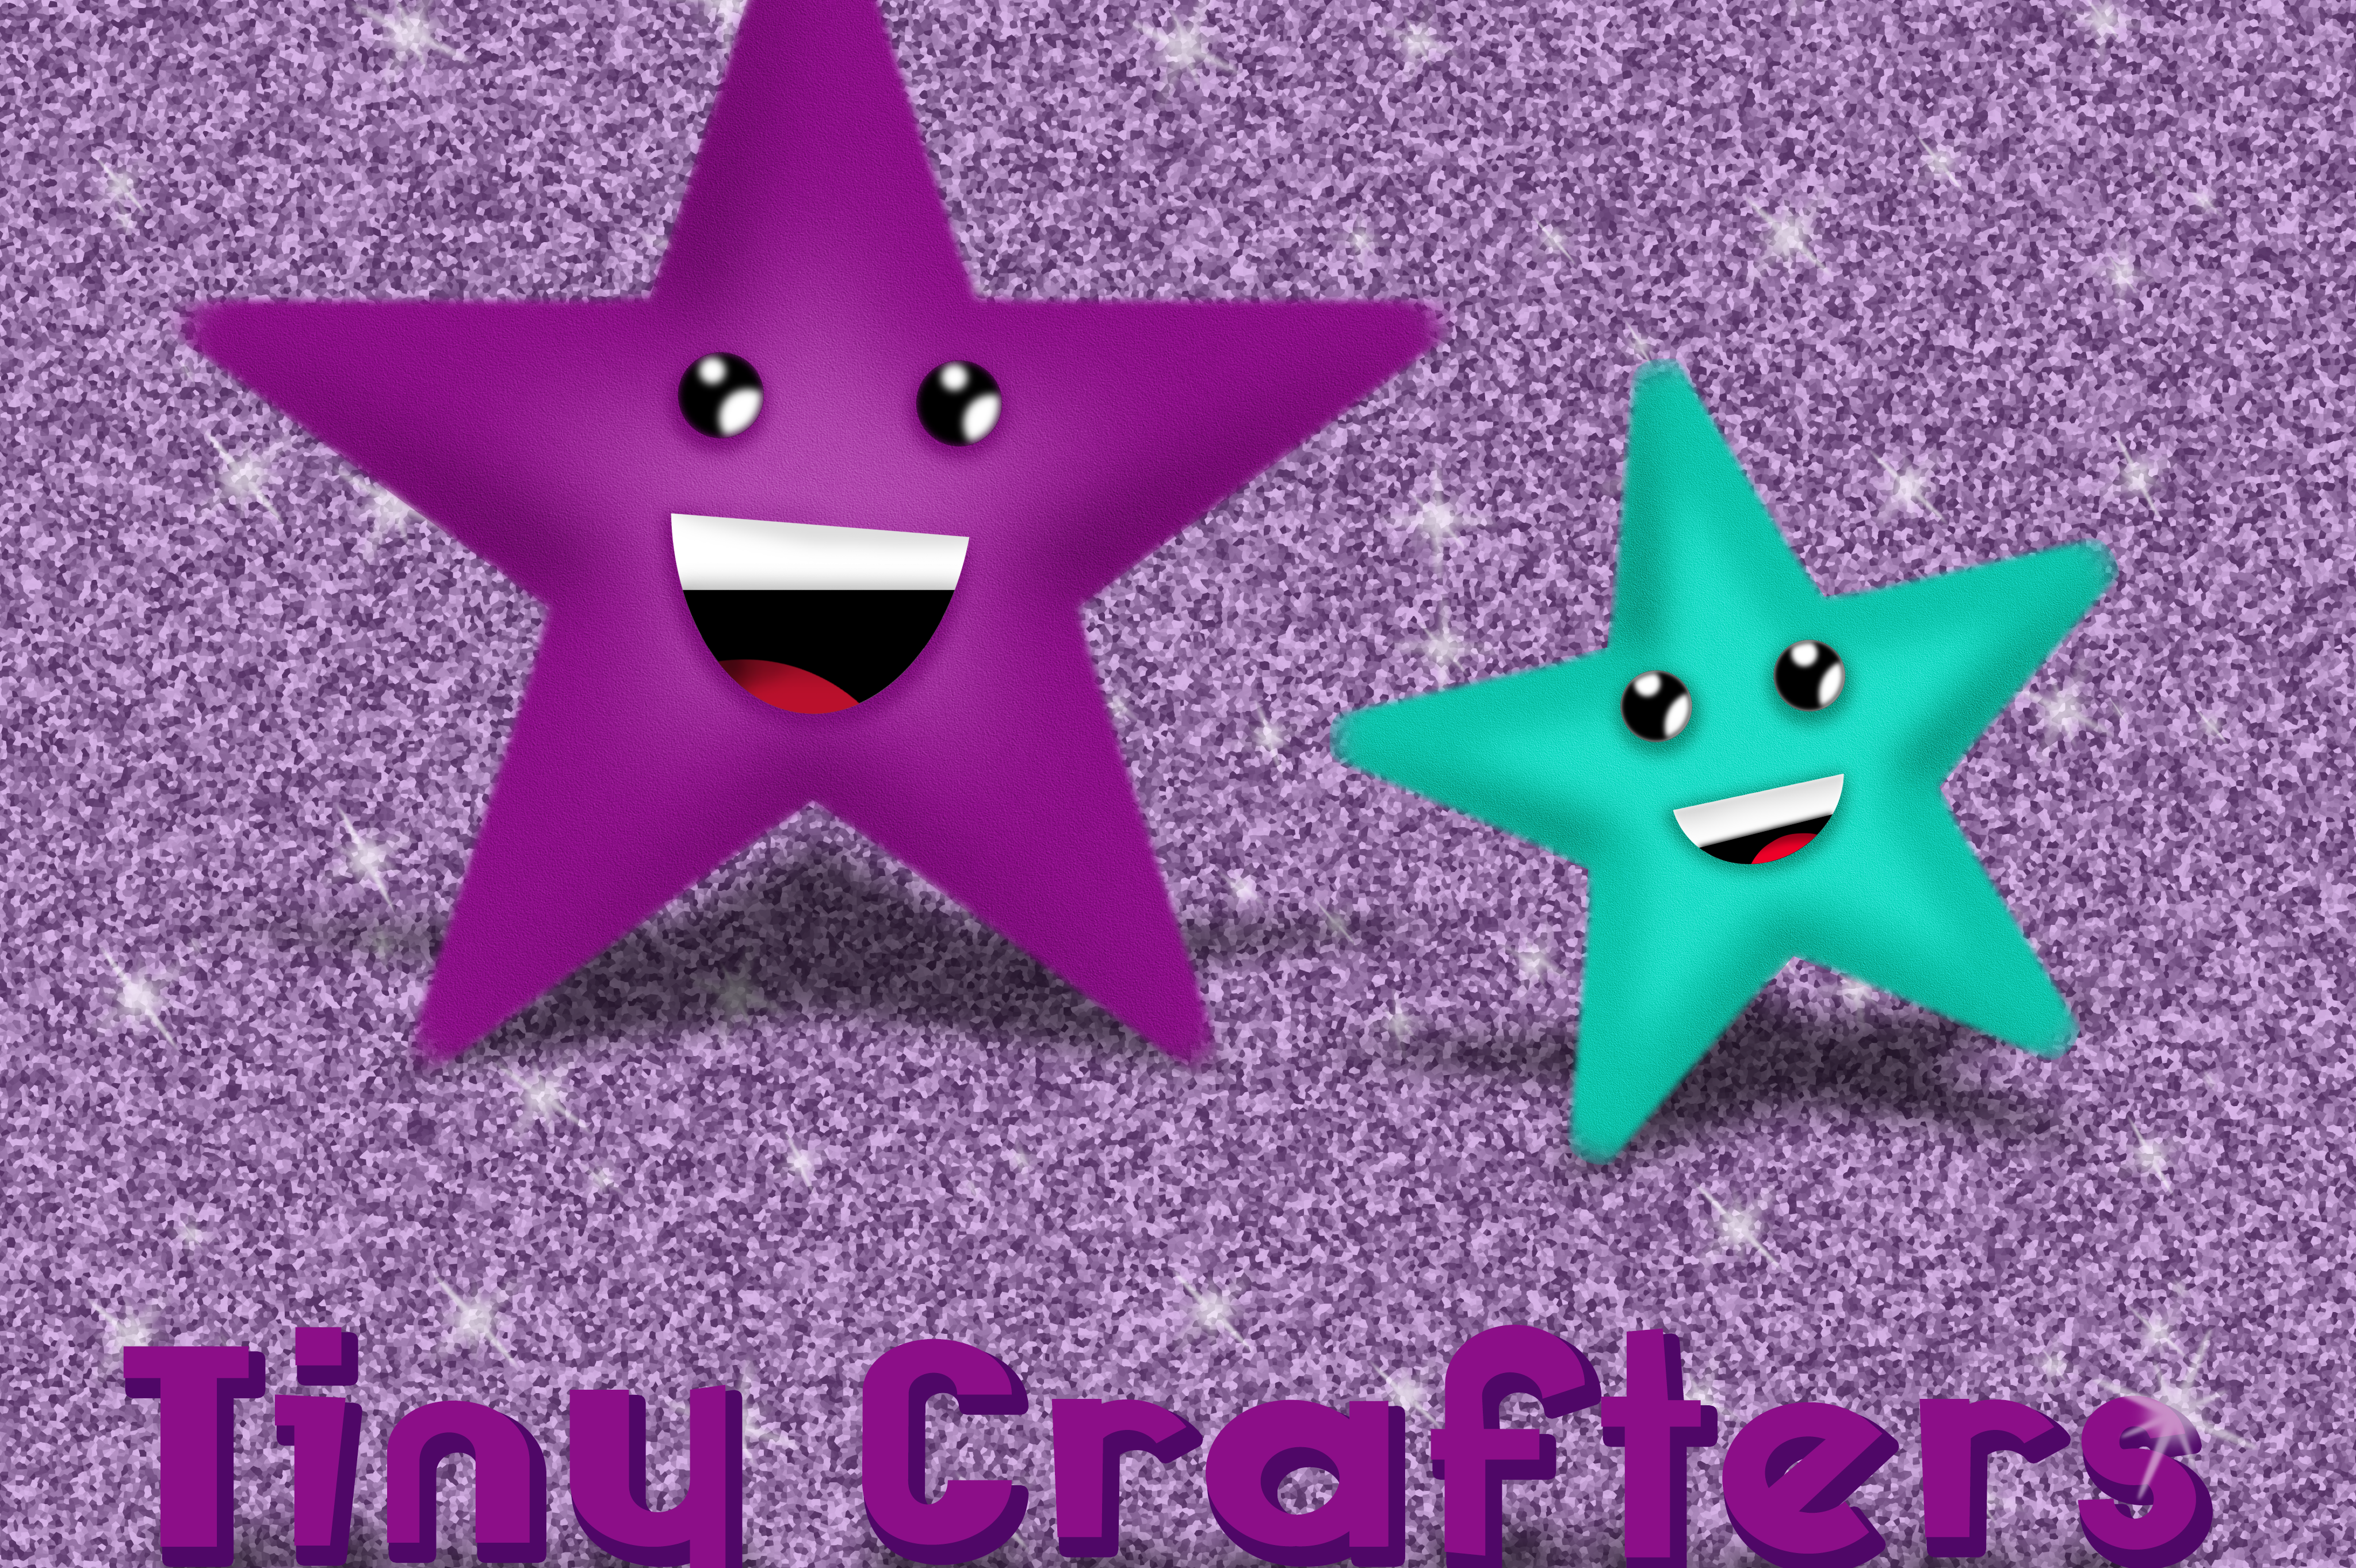 Tiny Crafters